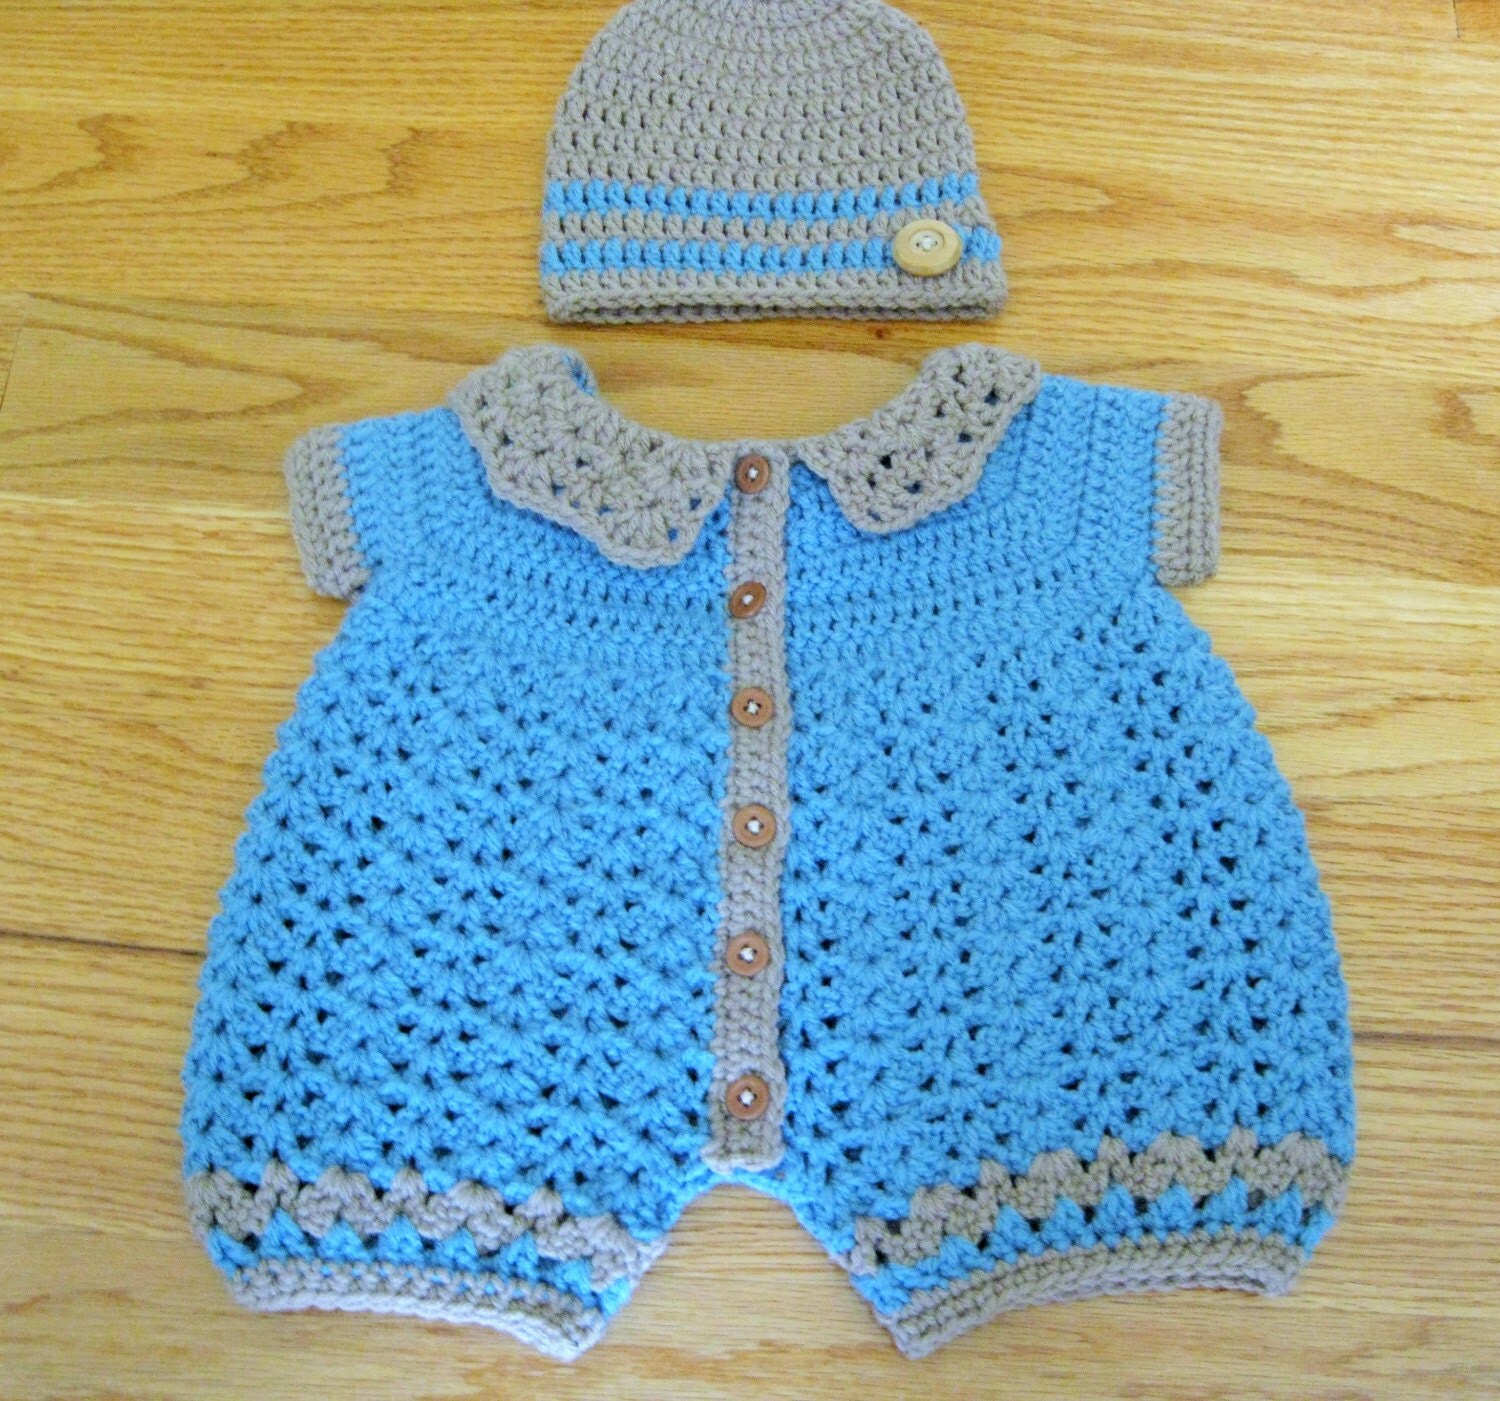 Handmade Crochet Baby Boy Romper and Hat Set 3-6 by TheComfyBaby